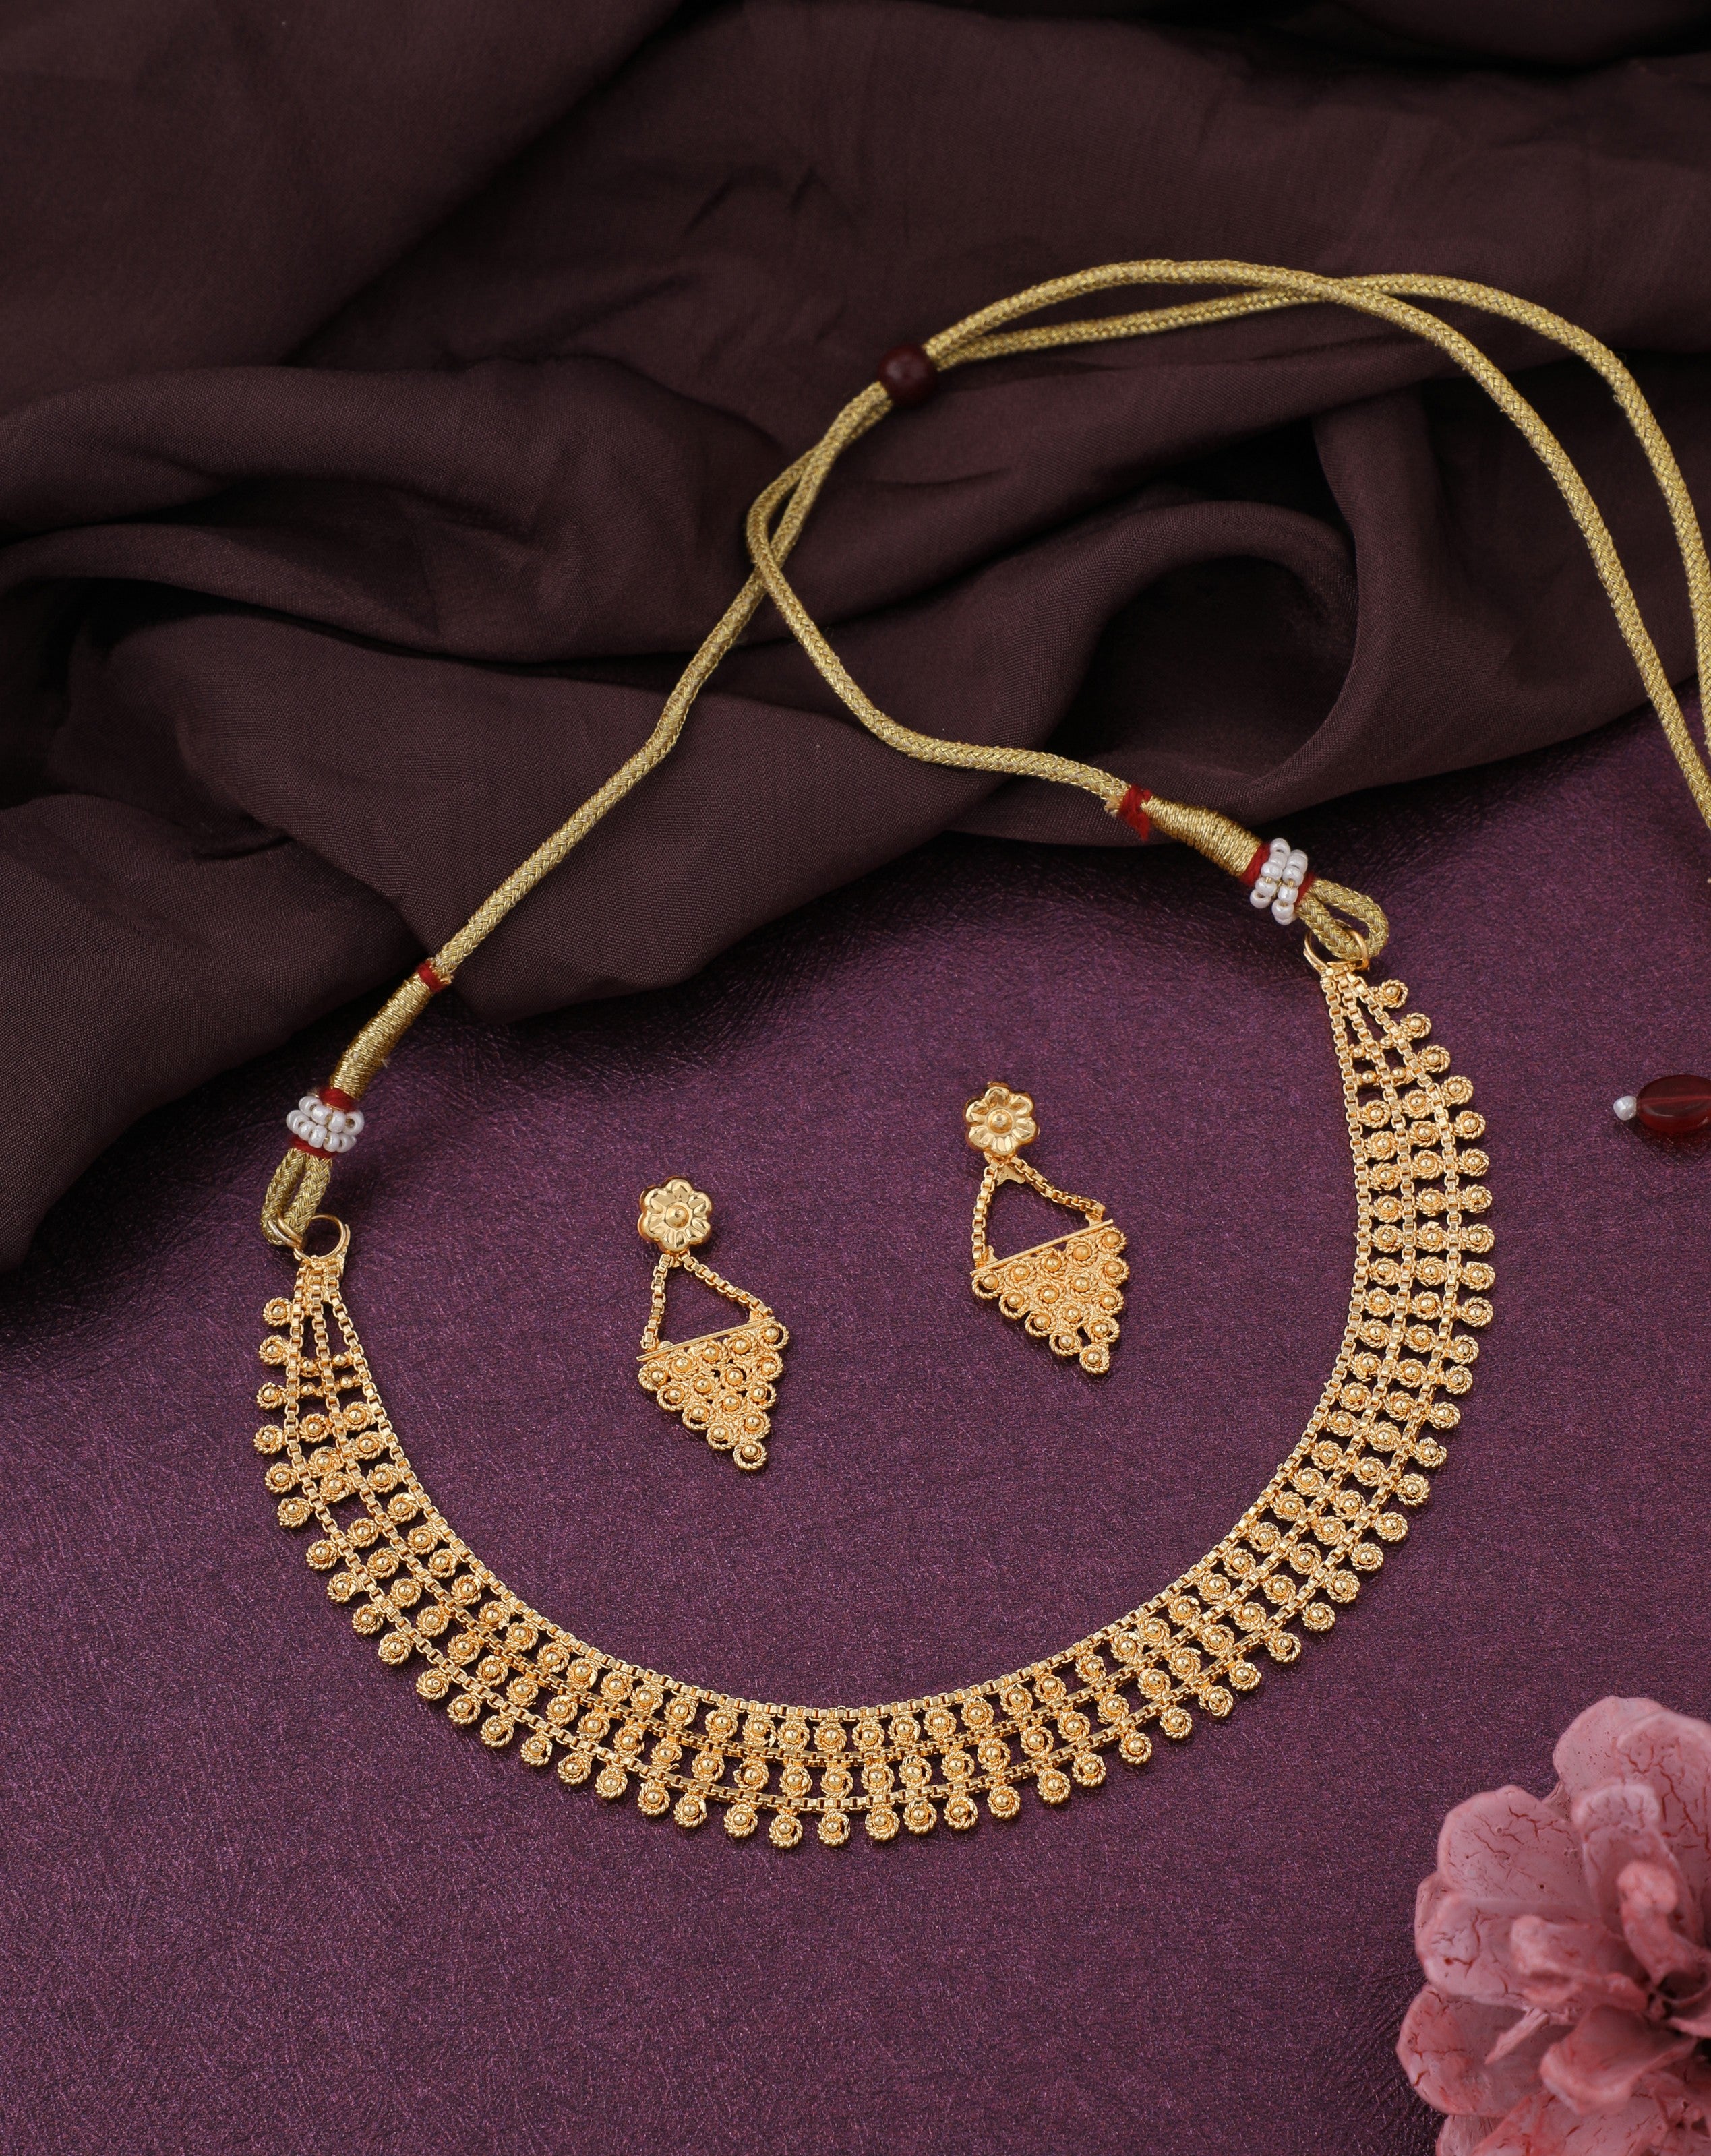 Gold-Plated Handmade Kalkati Set With Matching Earring